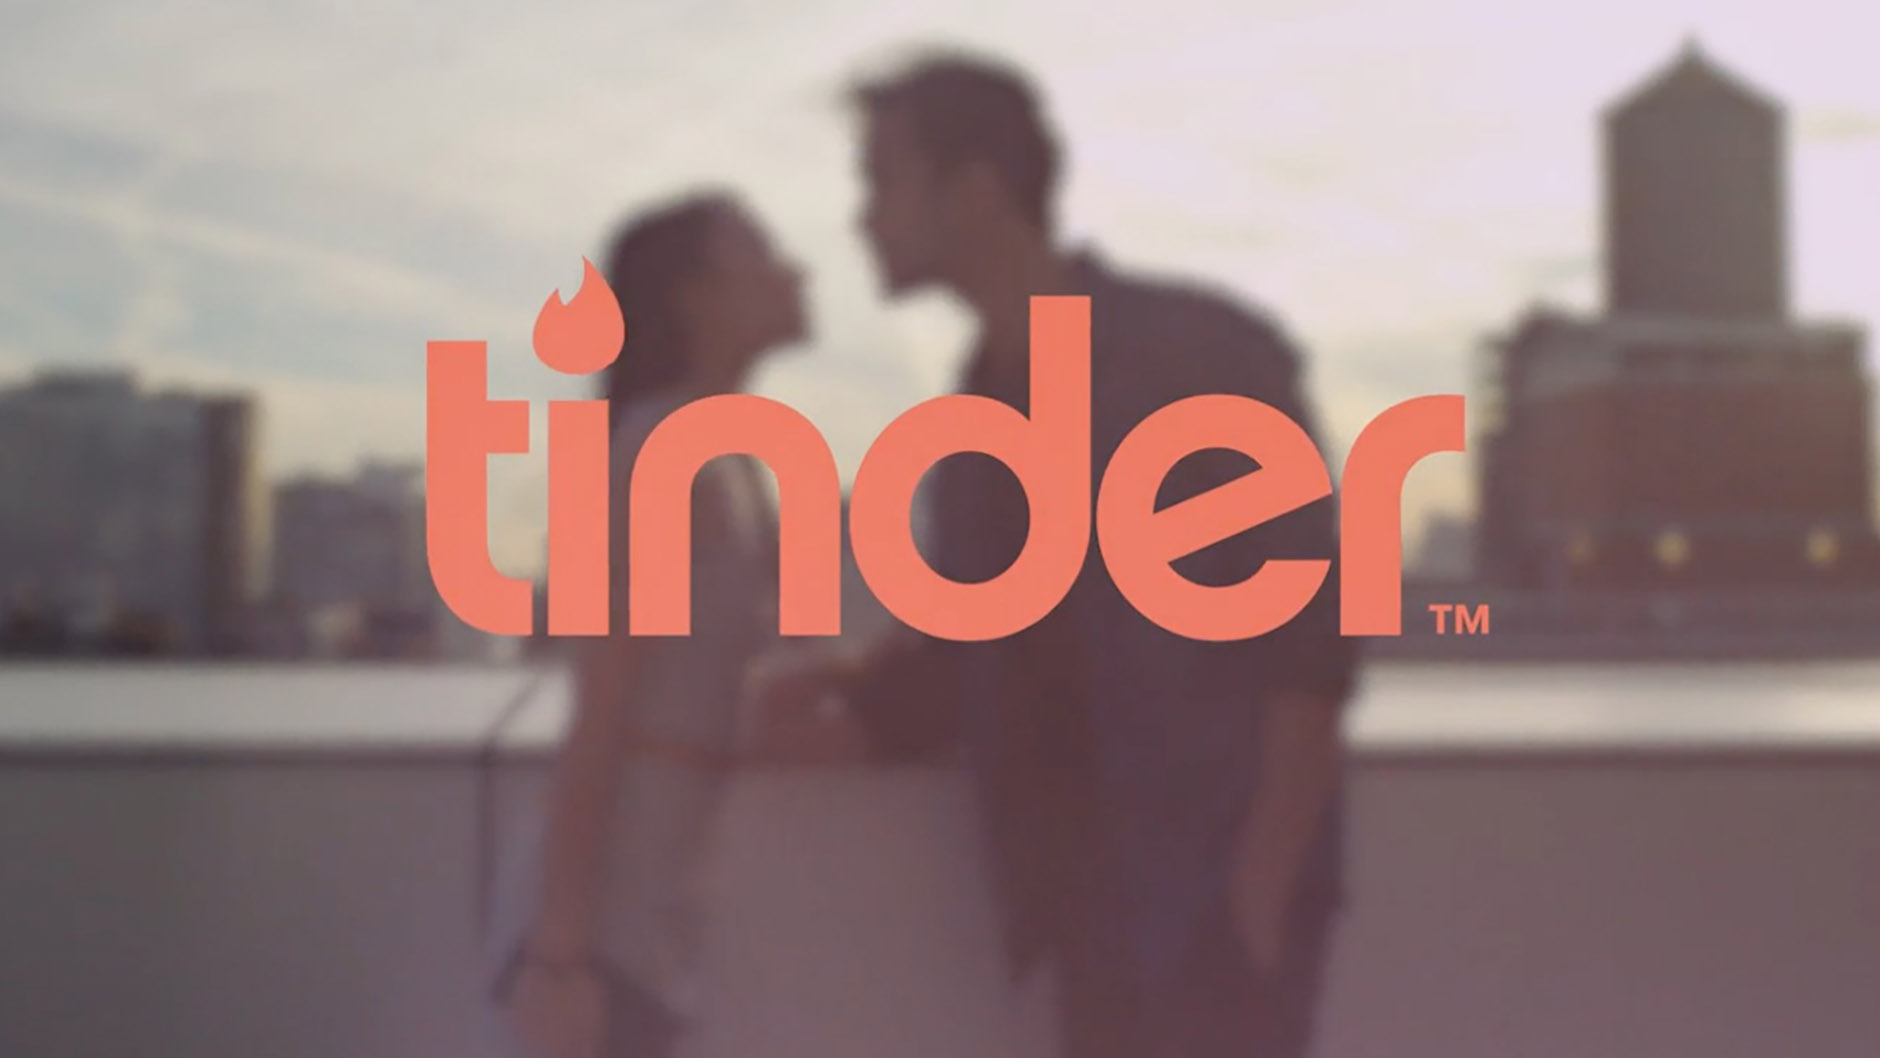 How does the Tinder algorithm work? Is there some logic to increase  matches, or is it random? - Quora